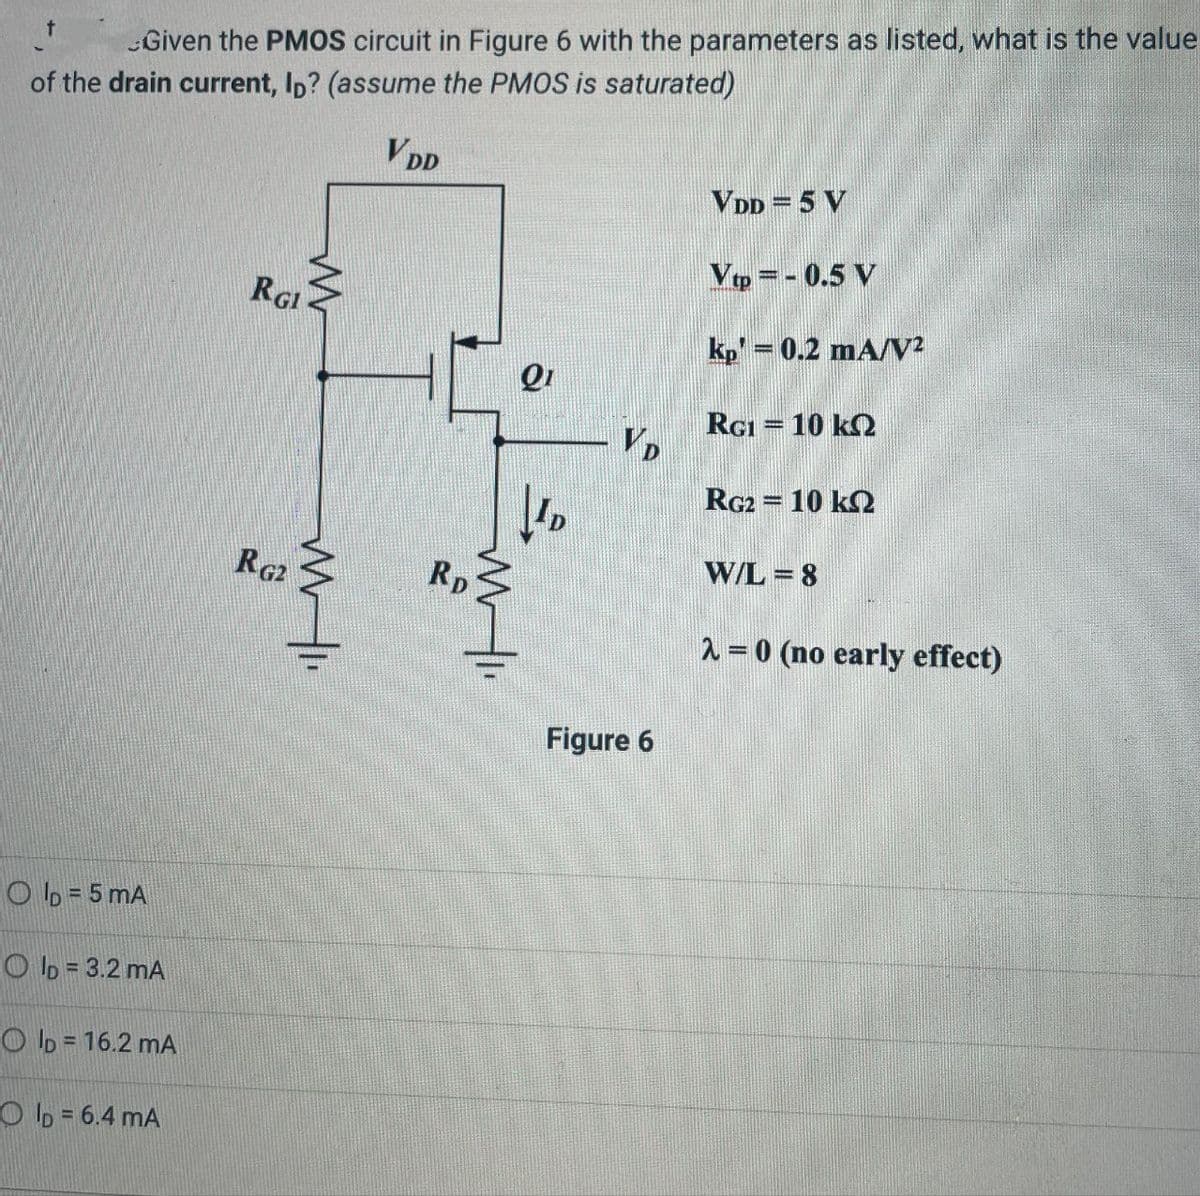 Given the PMOS circuit in Figure 6 with the parameters as listed, what is the value
of the drain current, ID? (assume the PMOS is saturated)
VDD
OID=5 mA
OID=3.2 mA
OID = 16.2 mA
OID = 6.4 mA
VDD = 5 V
Vtp=-0.5 V
RGI
kp' = 0.2 mA/V²
Q1
RG1 = 10 k
VD
D
RG2
RD
Figure 6
RG2 = 10 k
W/L=8
2=0 (no early effect)